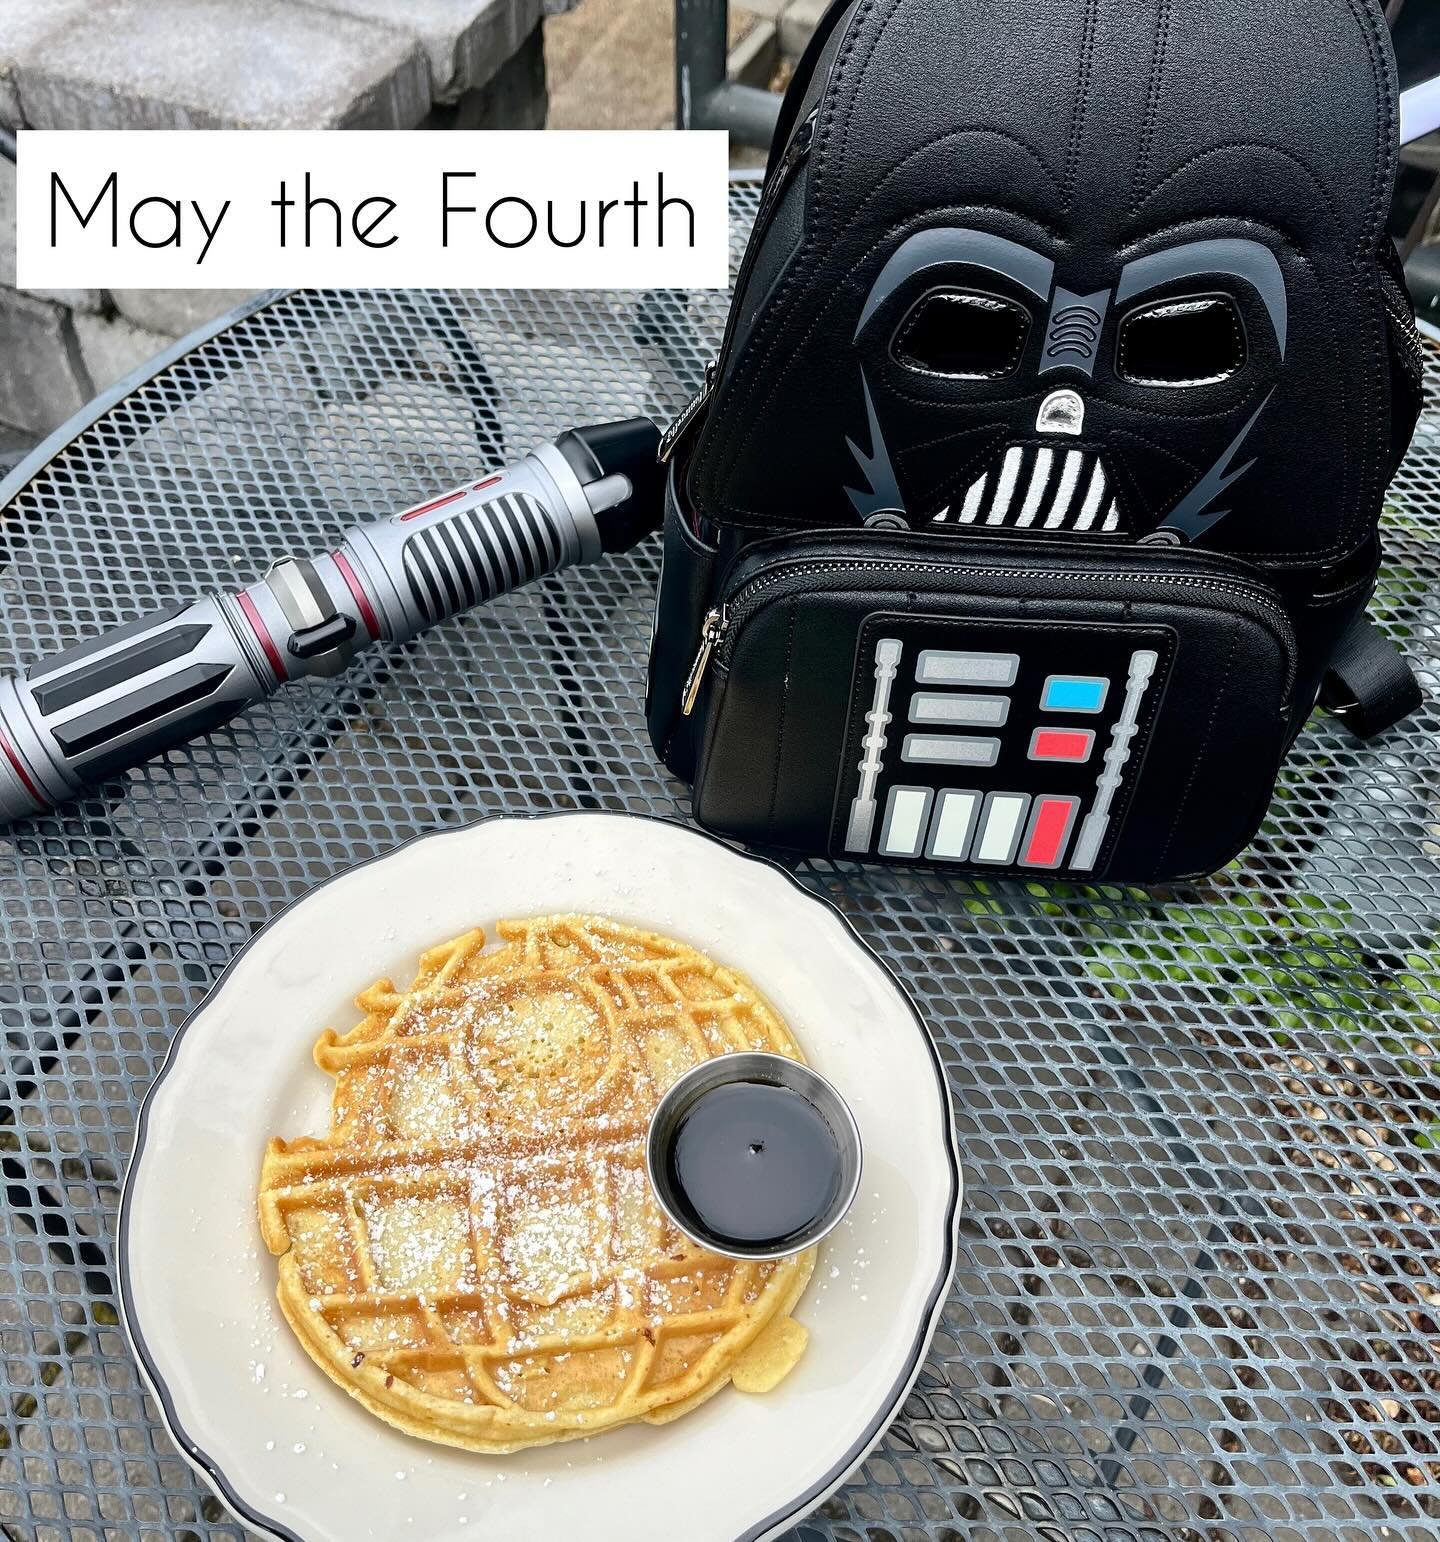 It&rsquo;s not a trap! One of our favorite days is coming up this Saturday&hellip; May the Fourth. 

The Riv will again be giving out FREE Death Star waffles to all Jedi, Sith, Padawan, etc.

Simply come in wearing your favorite Star Wars gear to cla